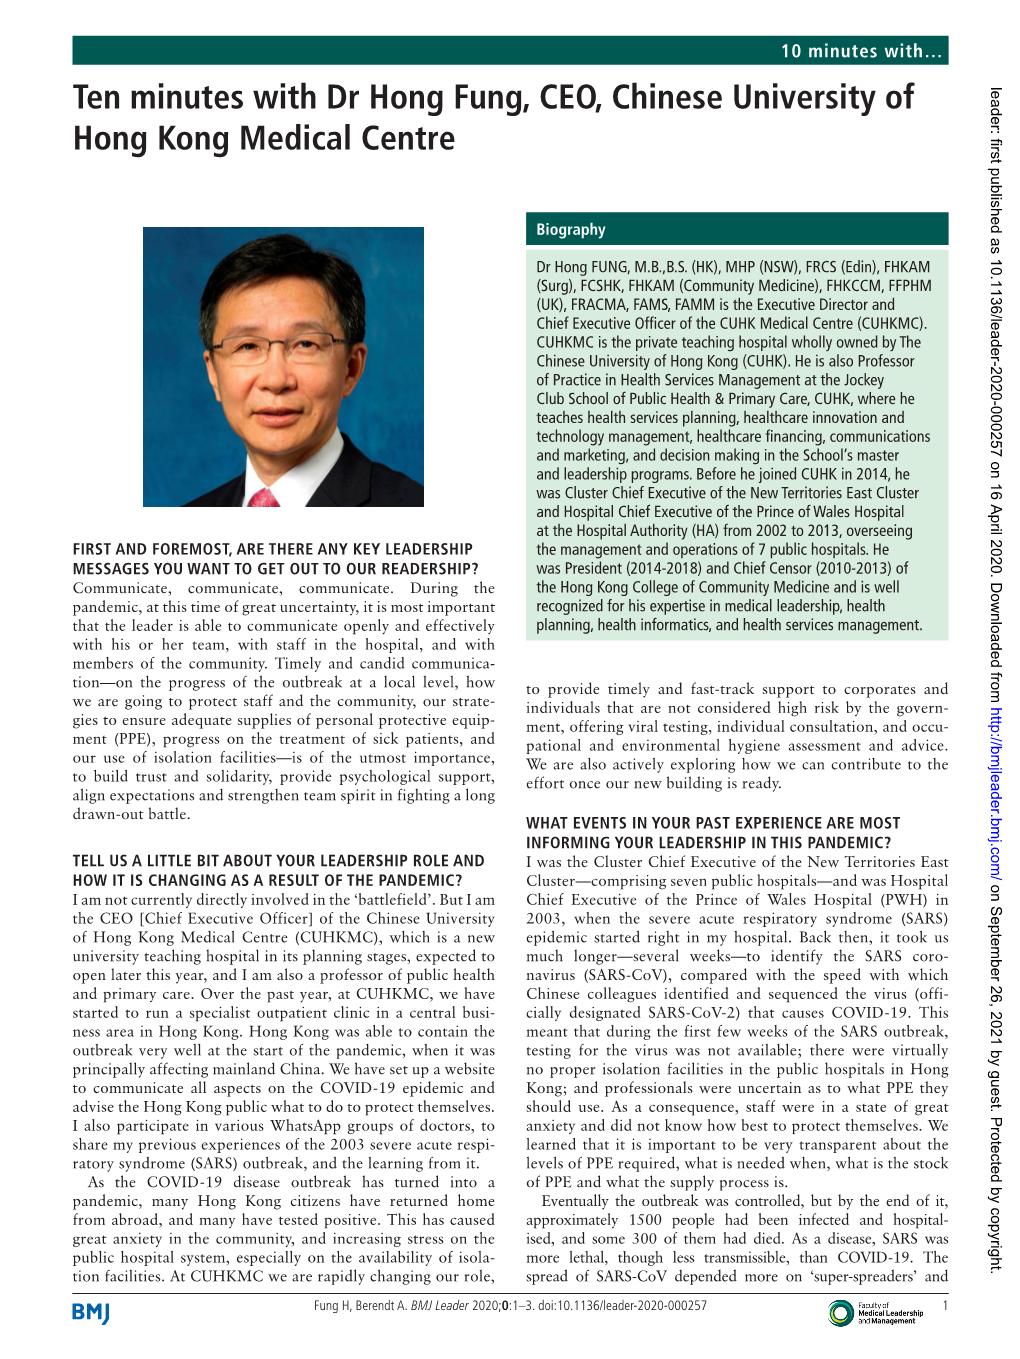 Ten Minutes with Dr Hong Fung, CEO, Chinese University of Leader: First Published As 10.1136/Leader-2020-000257 on 16 April 2020